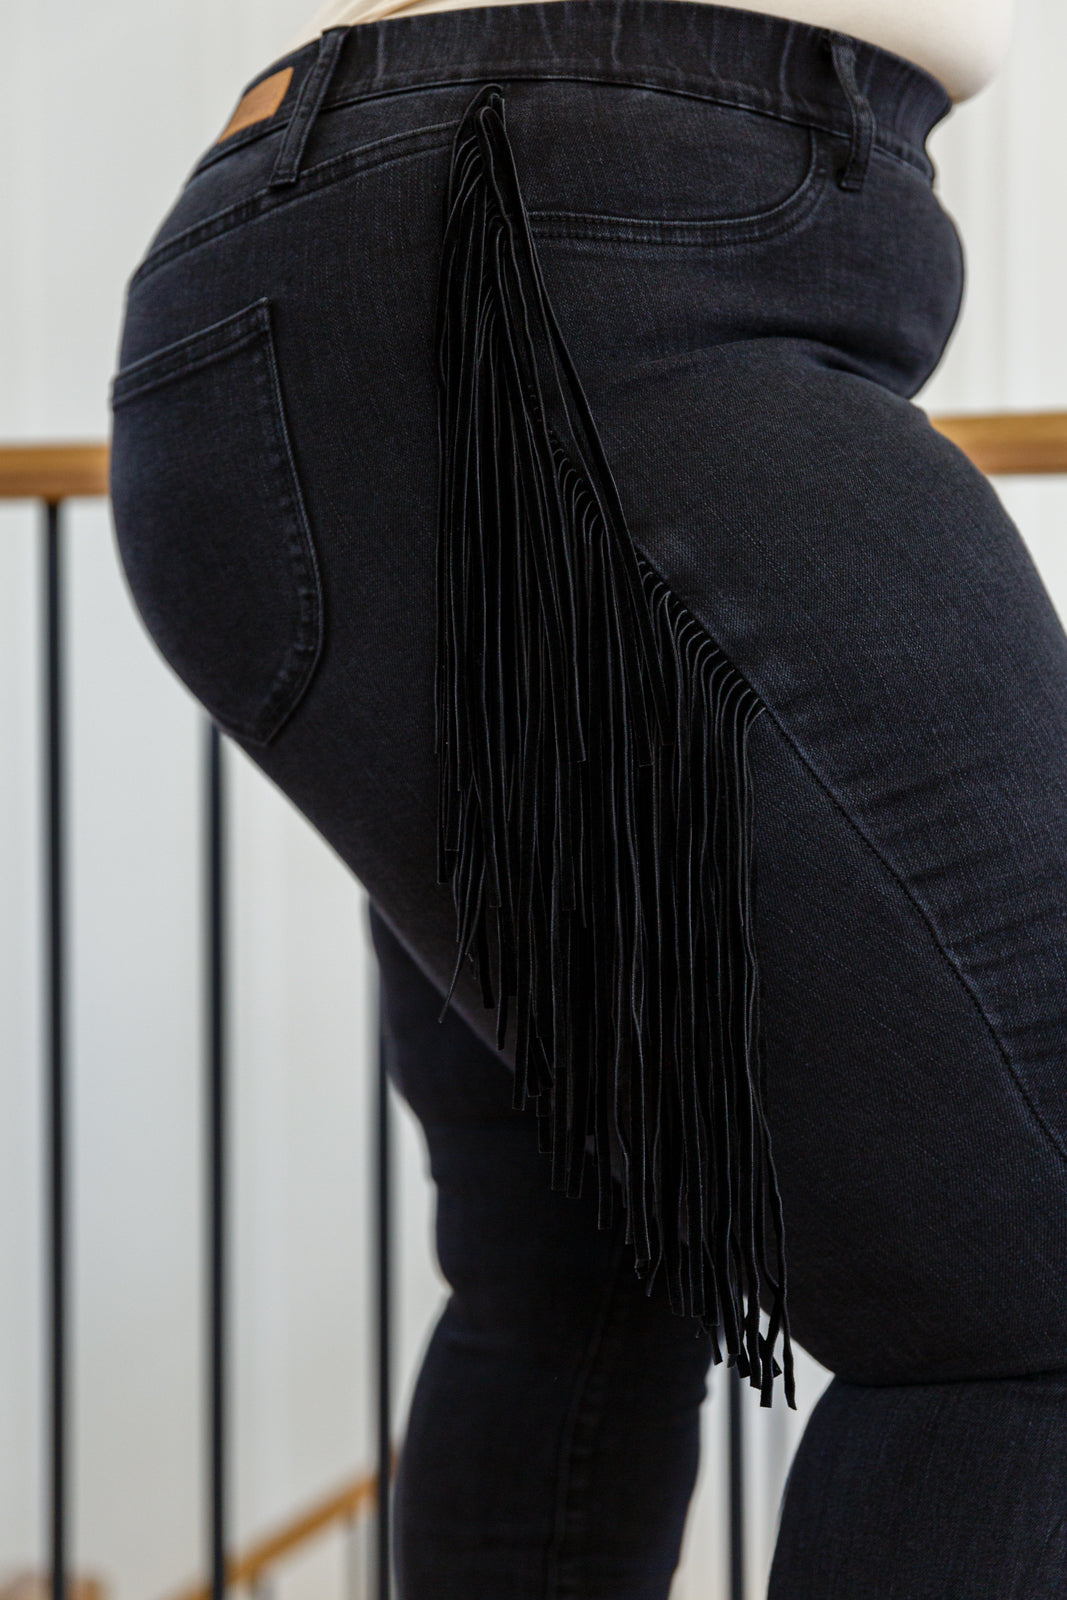 If there's anyone who can totally rock the Hilary Side Fringe Skinny Jegging In Black it's you! These western inspired jeggings feature a mid-rise waist with faux front pockets topping a skinny pant leg. Faux suede fringe decorates either side of these jeans adding a unique and stylish touch. Add cowboy boots and a crop top for a super fun look! 0 - 24W